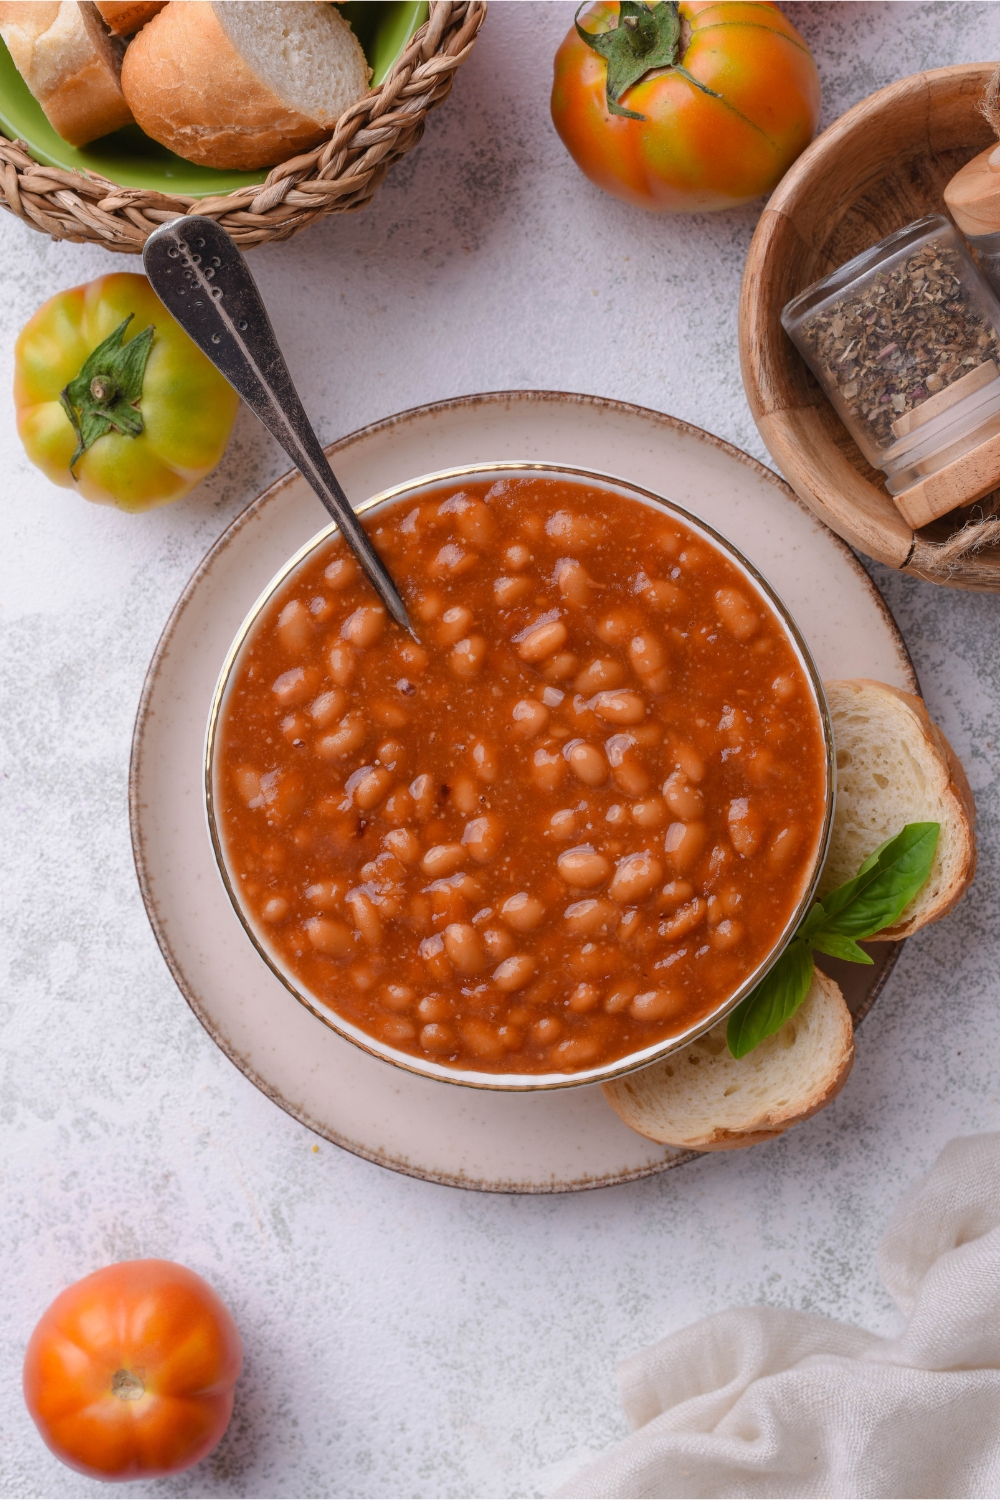 Top view of a bowl of baked beans in a bowl served with two slices of crusty bread.